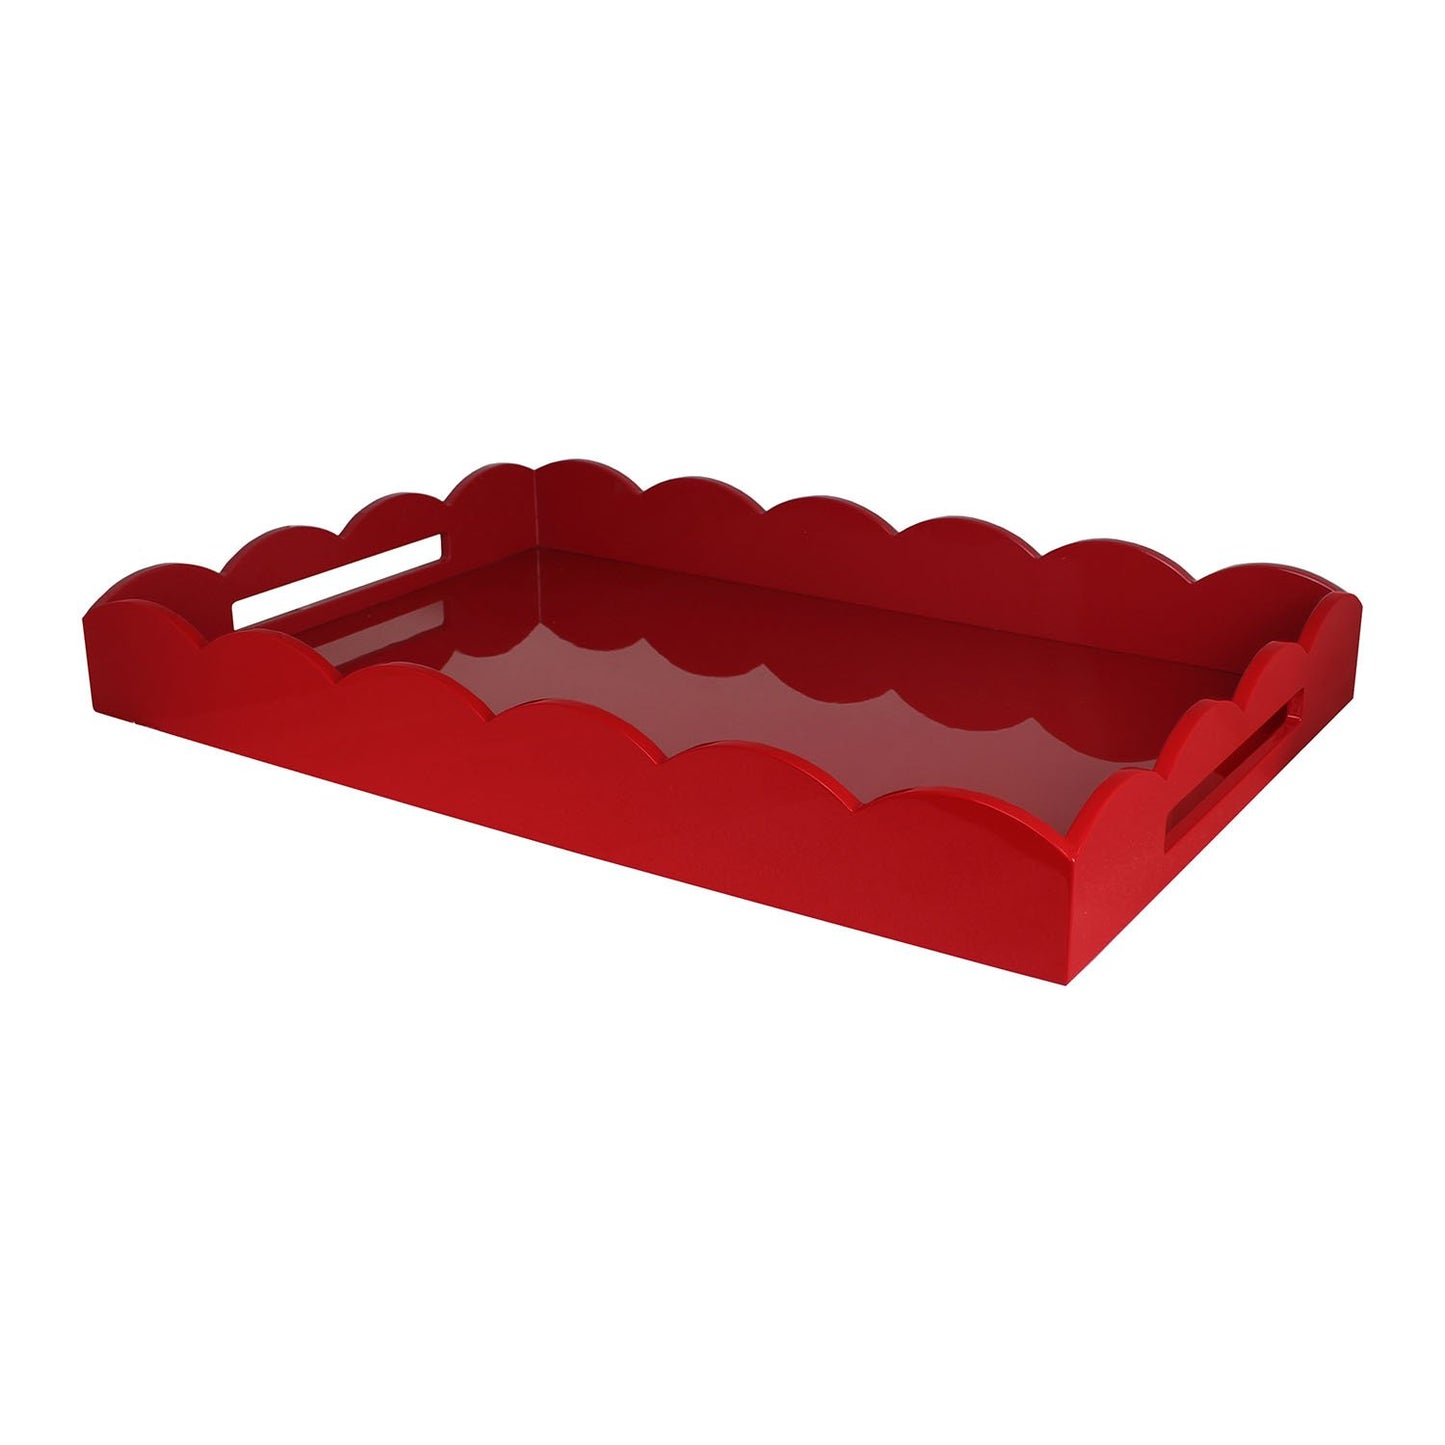 Large, red scalloped edge tray